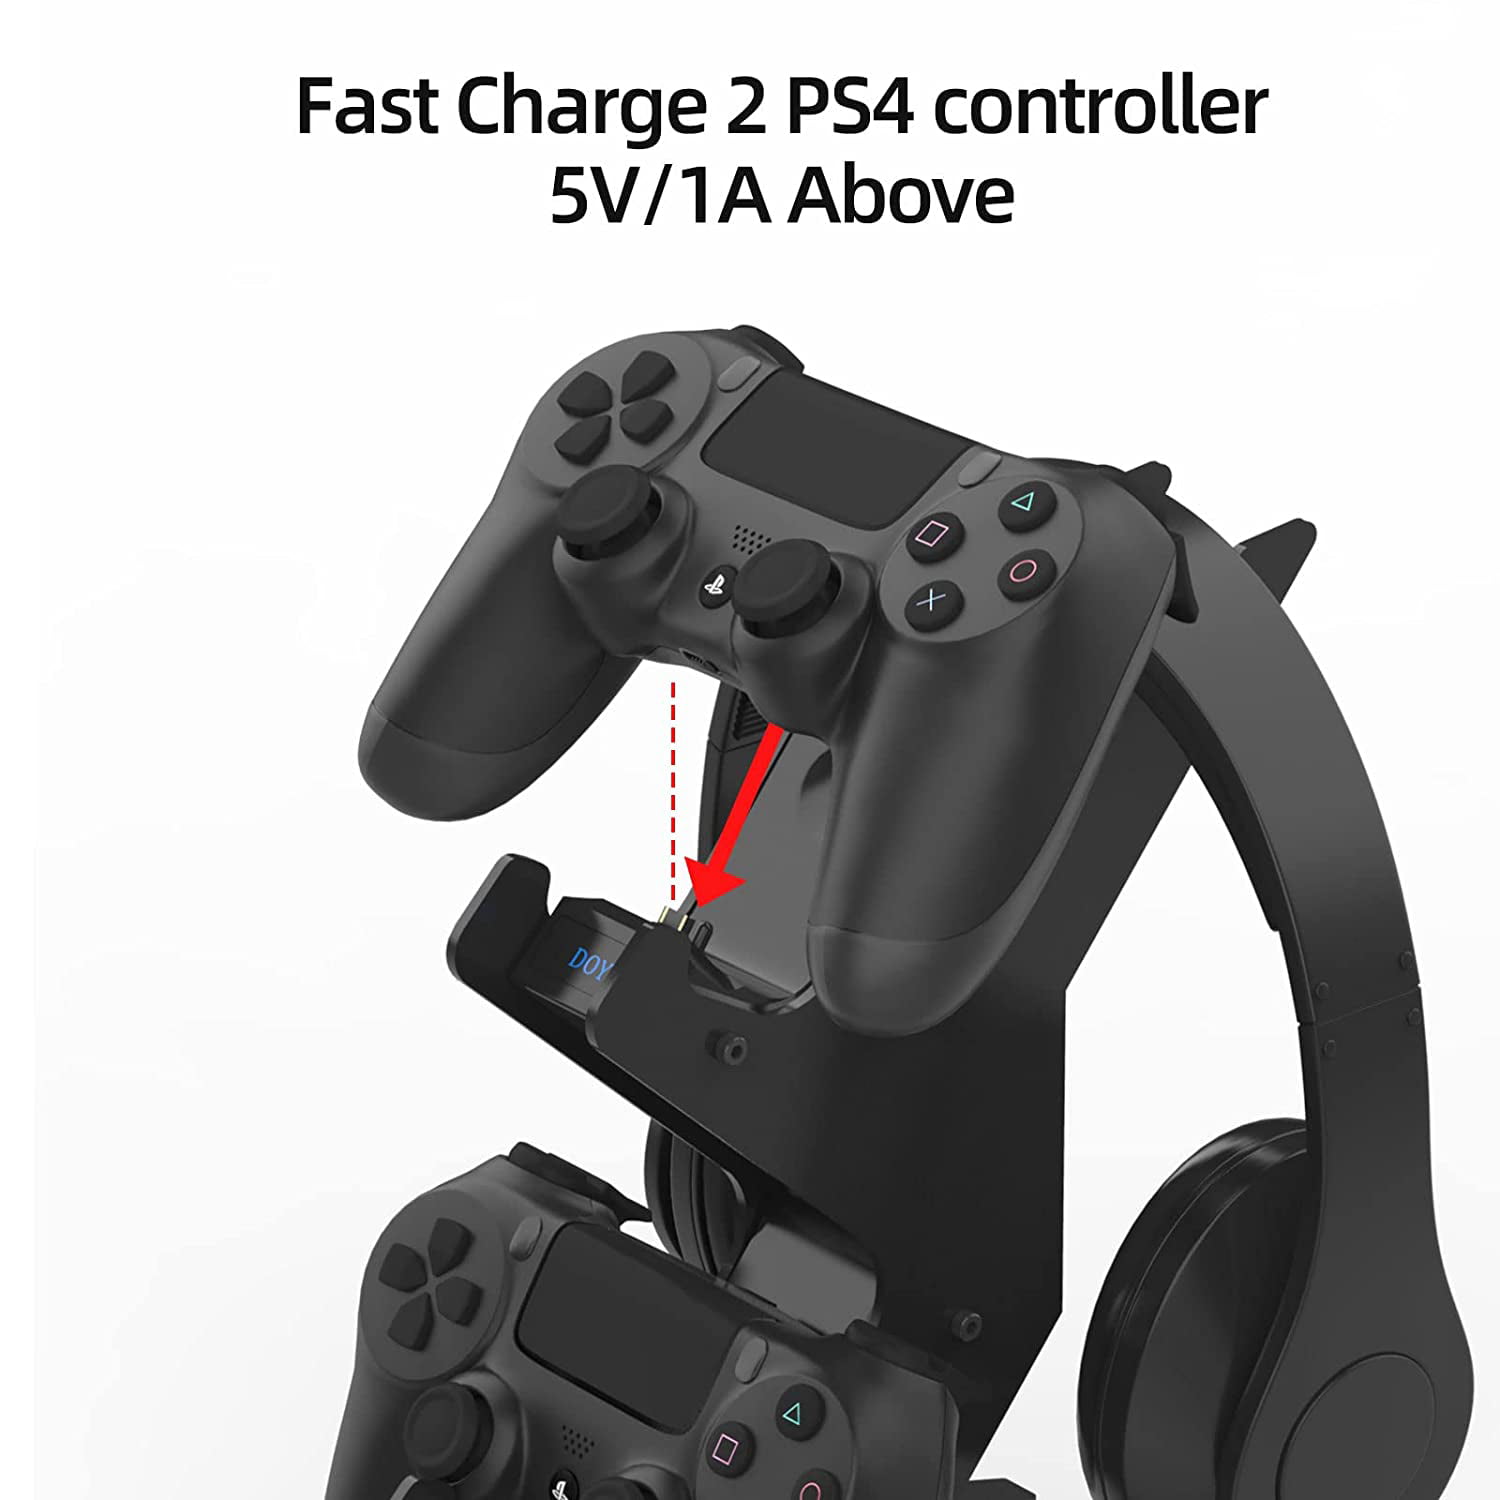 Charger Dock Headset stand for Sony Playstation 4 Included A Wireless PS4 controller Joystick Controller Charging Dock for PS4 2 Pack PS4 Gaming Accessories 